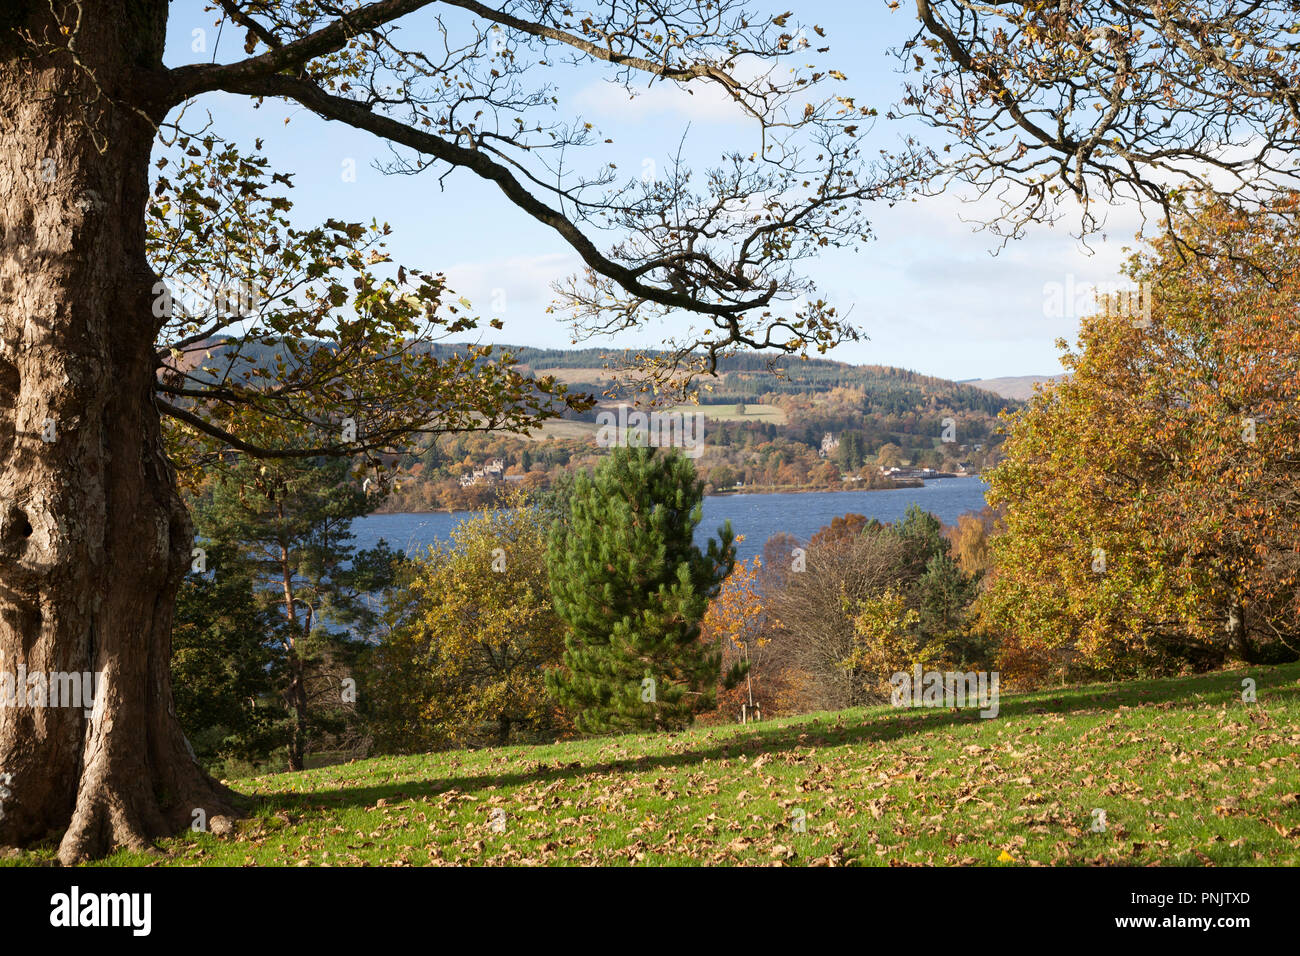 Autumn scene with copper coloured leaves overlooking Loch Lomond, Argyll, Scotland Stock Photo